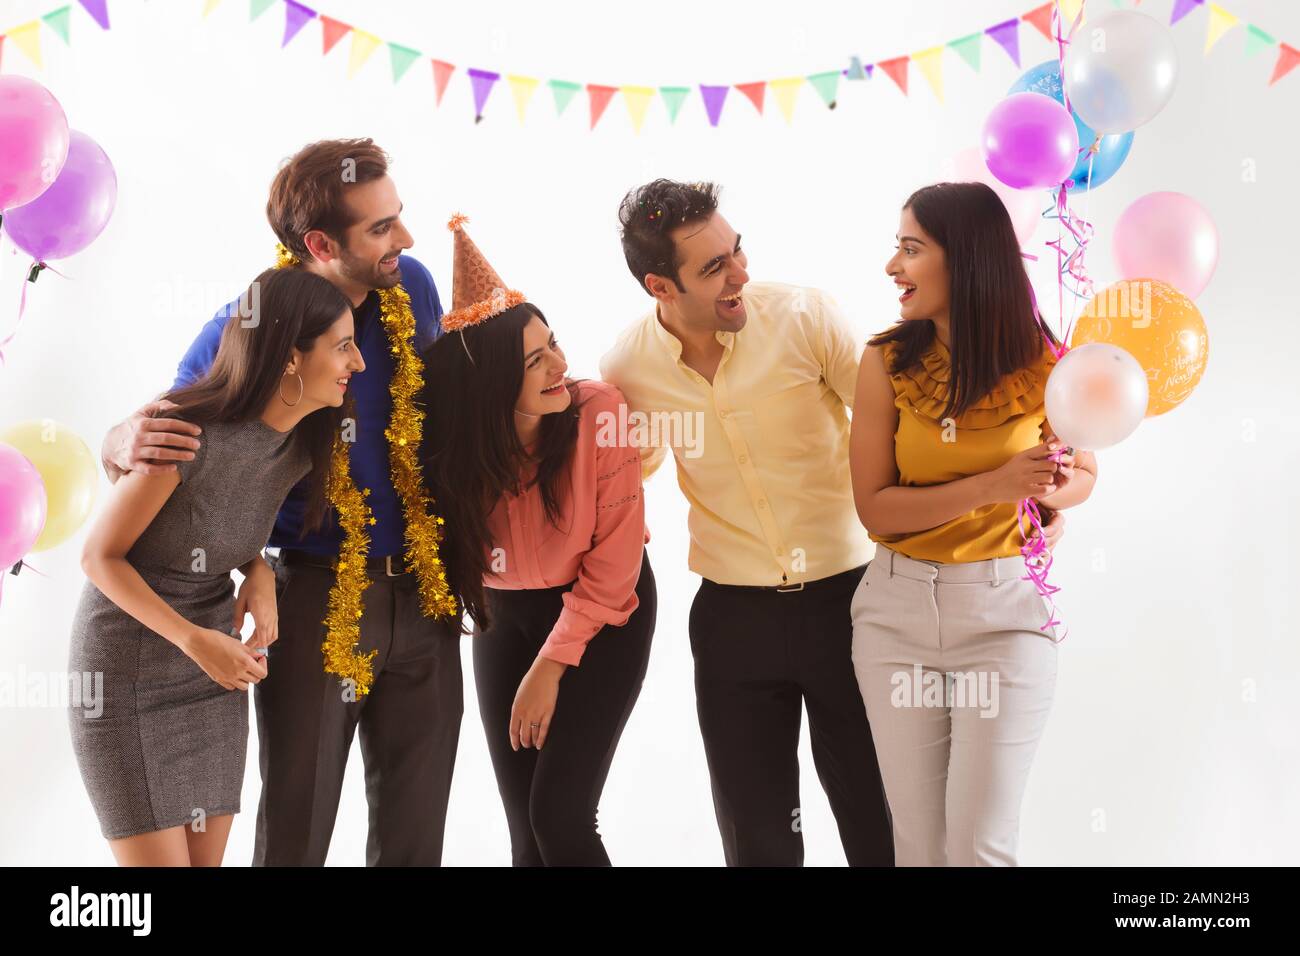 Friends having fun together at a party. Stock Photo